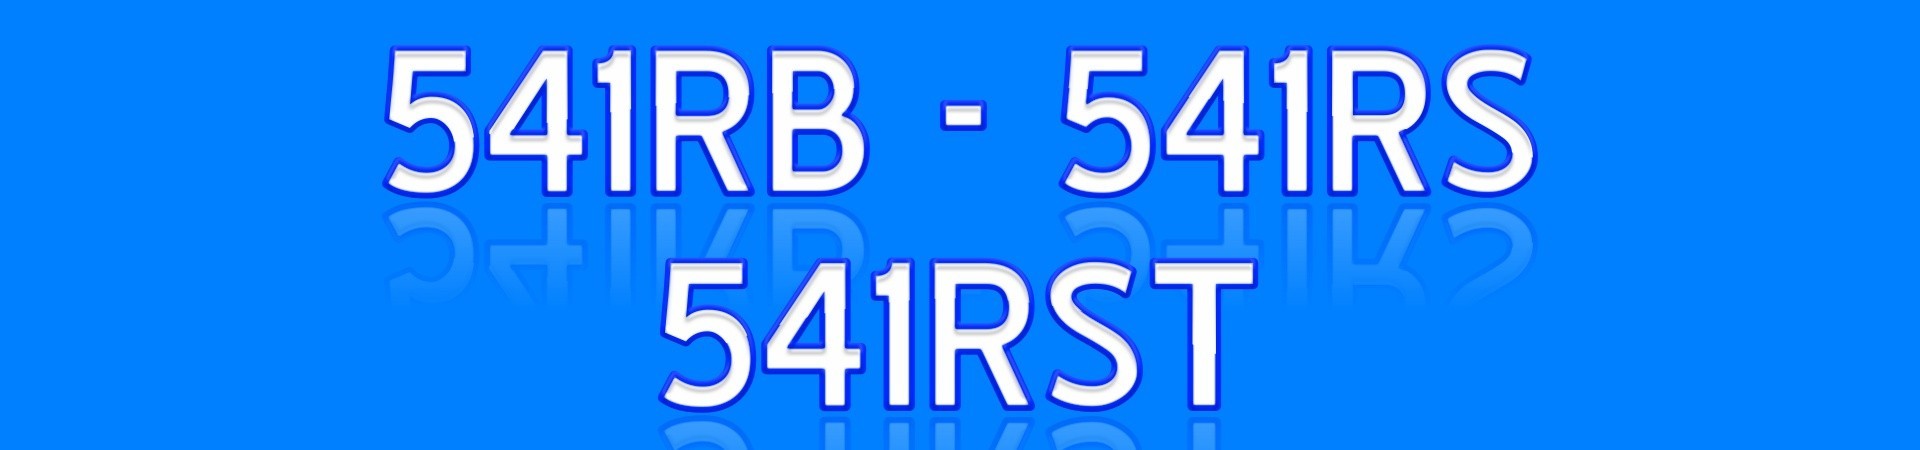 541RB 541RS 541RST